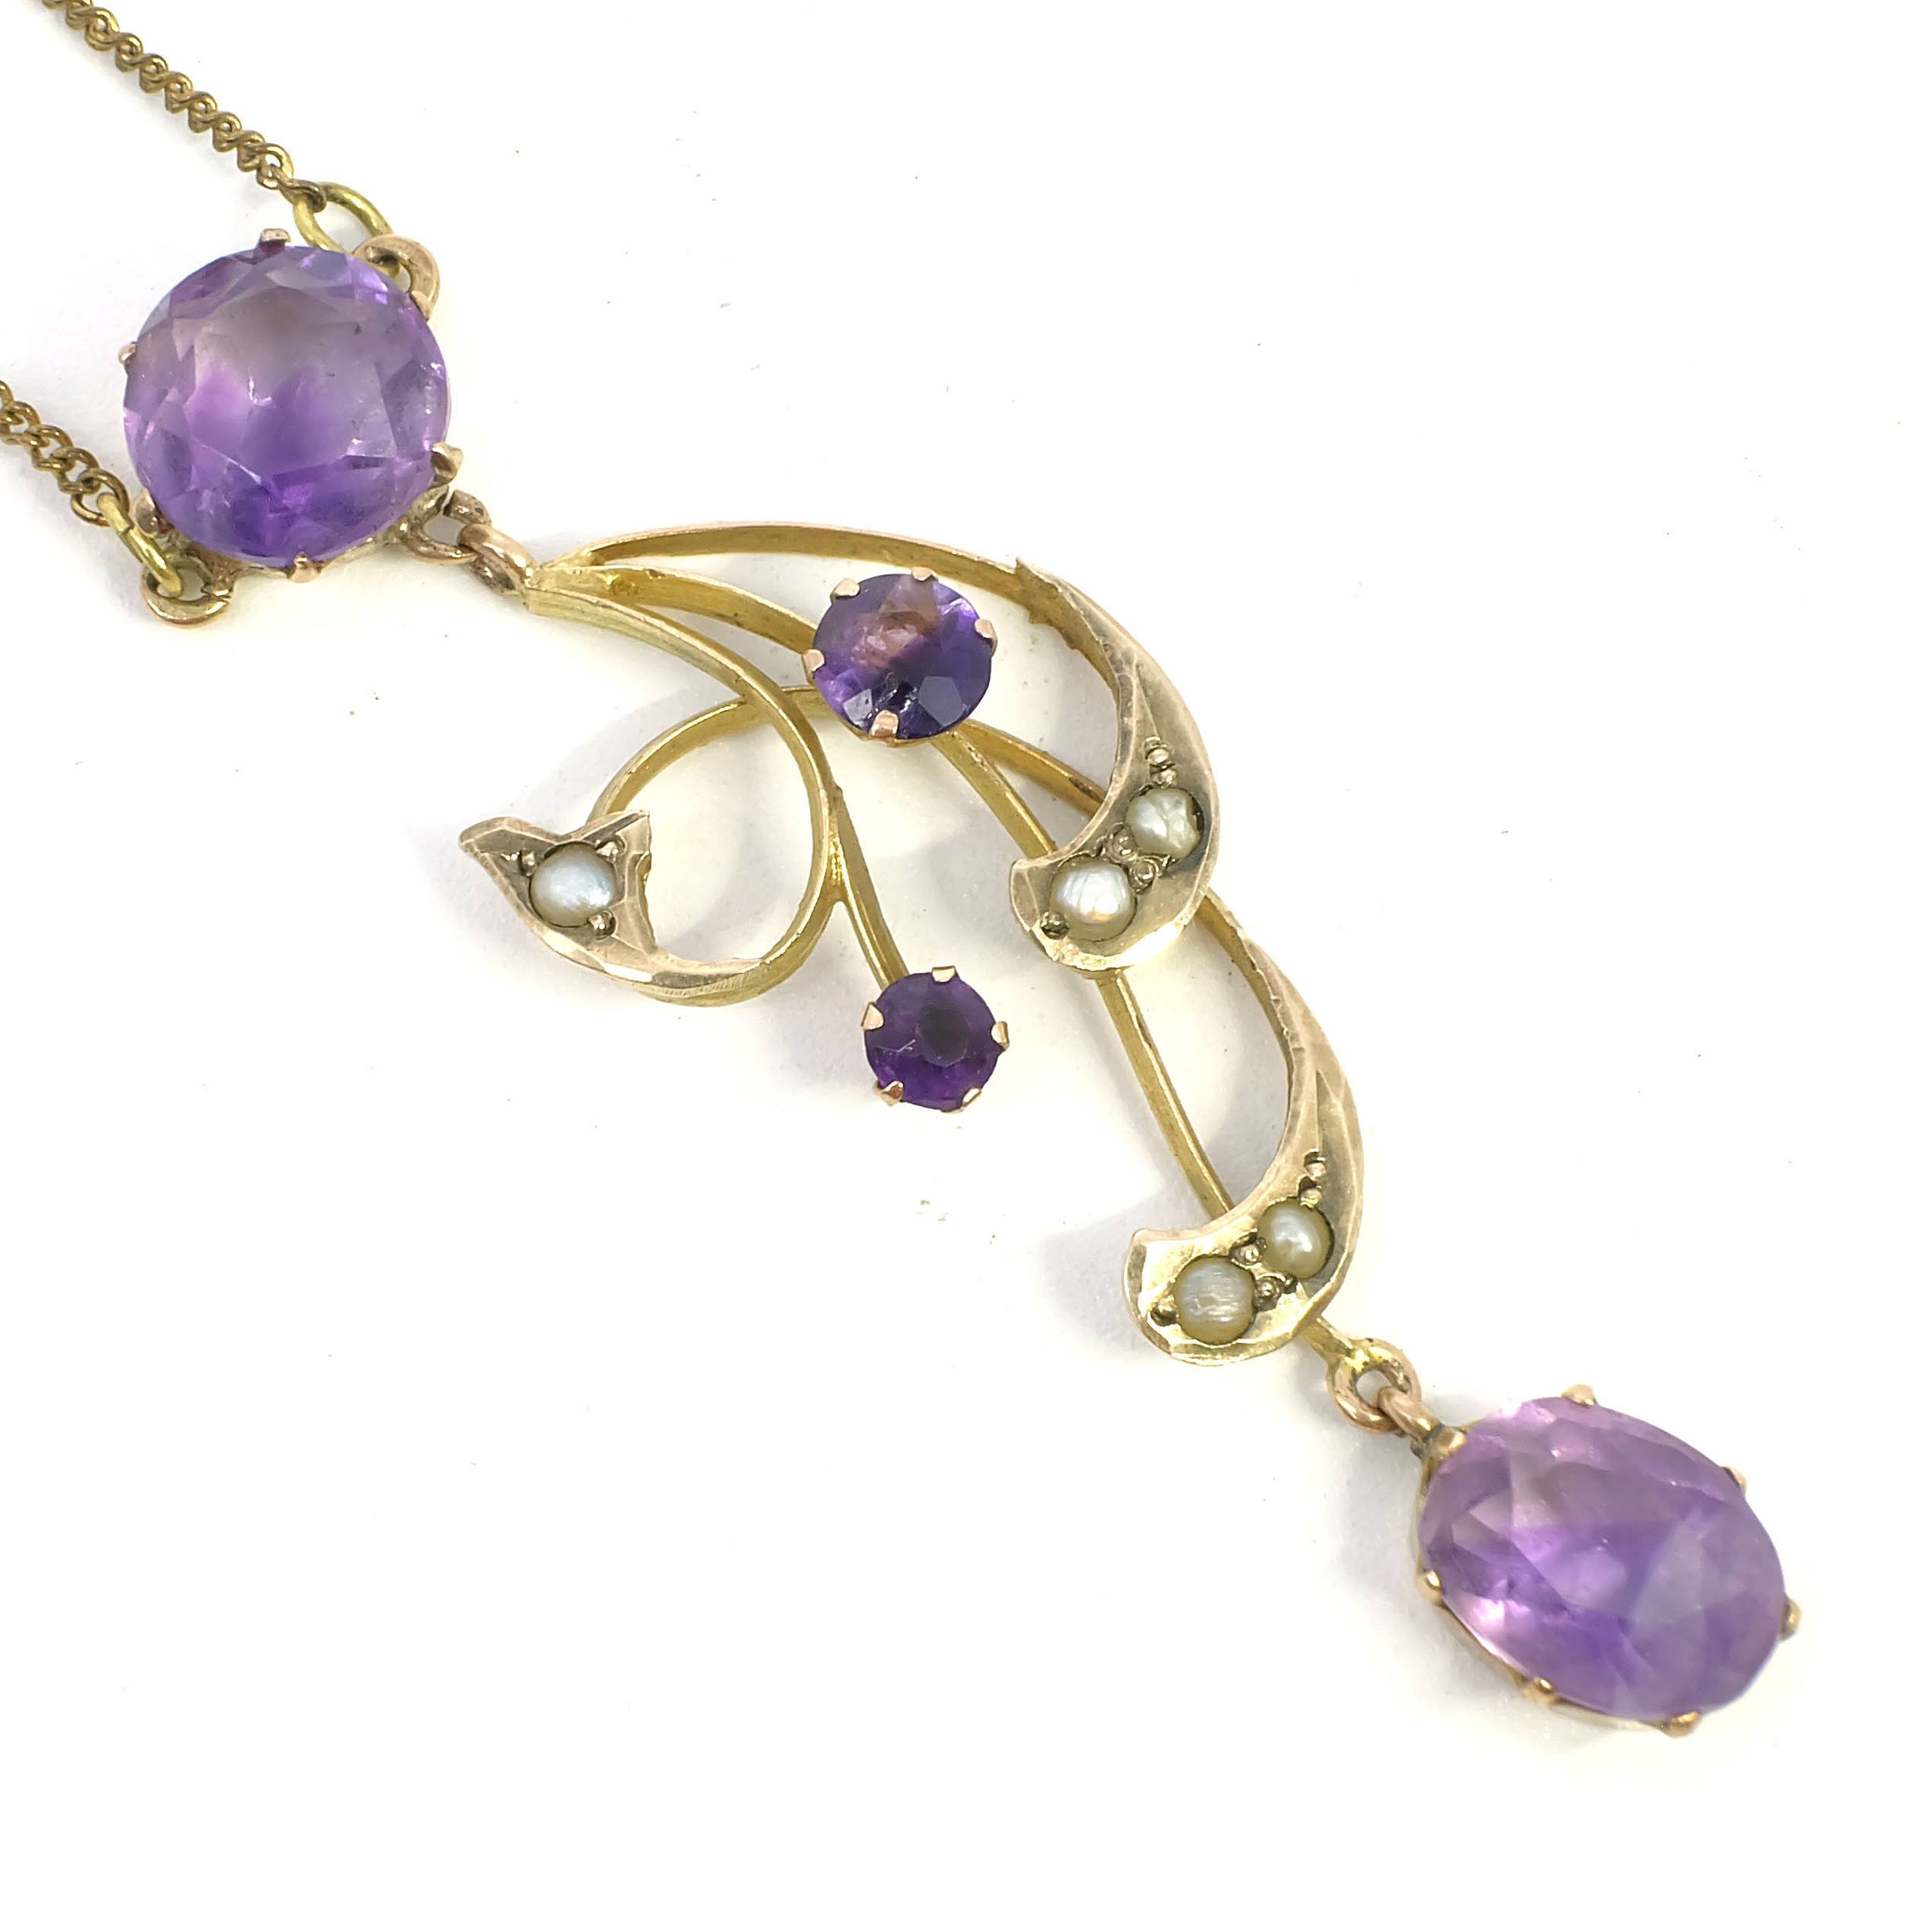 'Antique 9ct Yellow Gold Pendant With Amethyst and Seed Pearl on a Rolled Gold Chain, 3g'